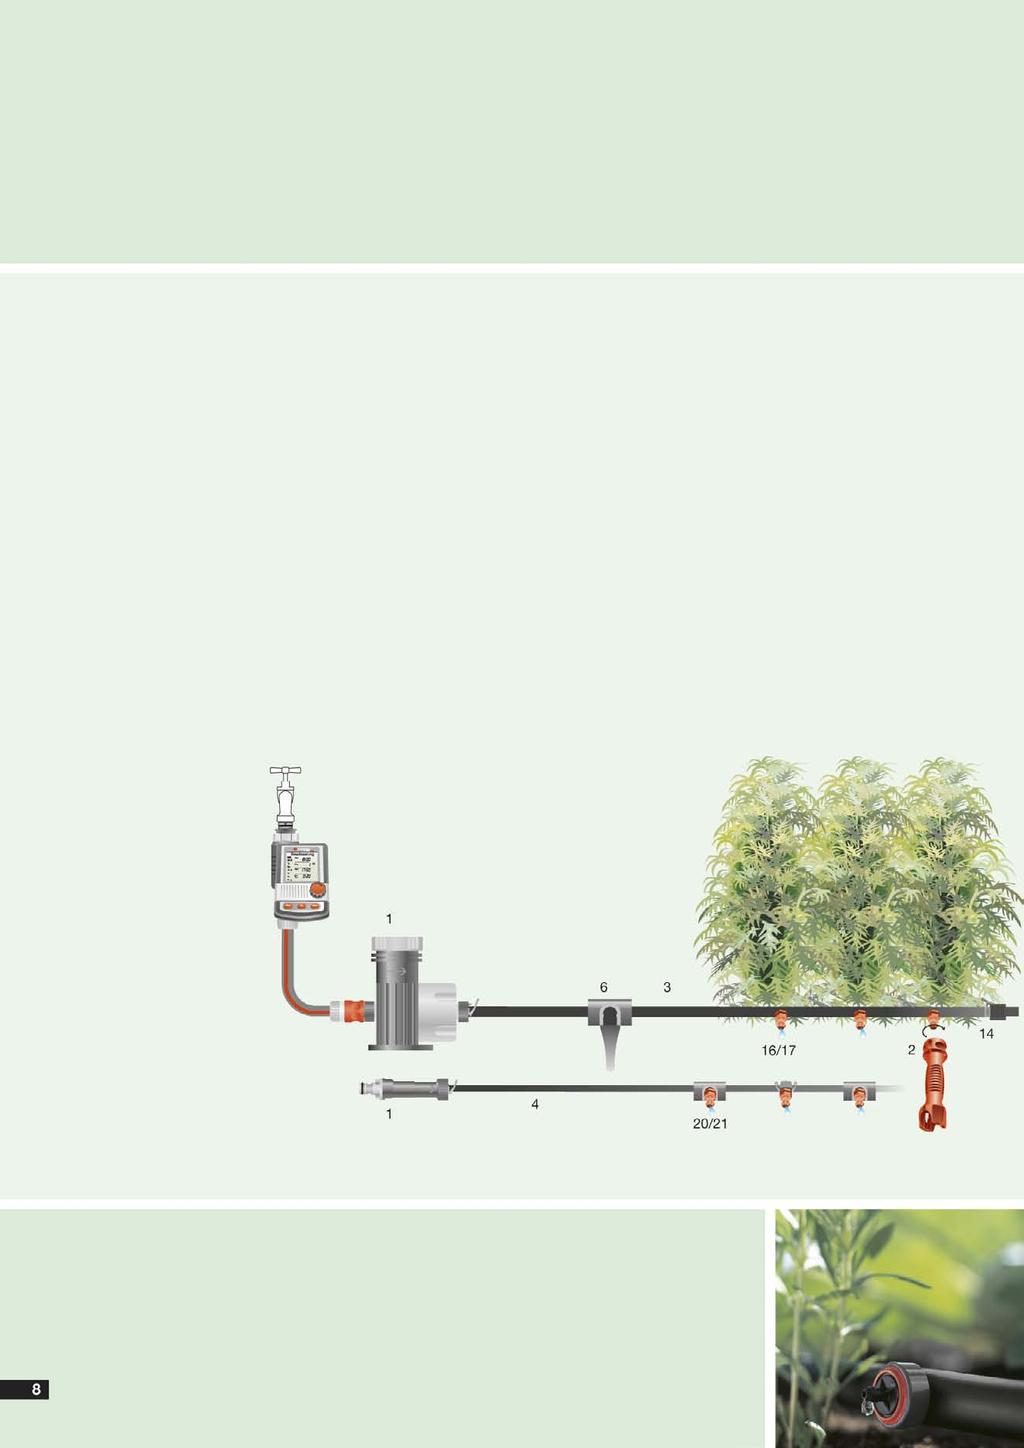 GARDENA Micro-Drip-System Extremely versatile garden irrigation for hedges, Easy watering for the entire hedge Route the 13 mm (1/2") Connecting Pipe (3) along the bottom of the hedge.